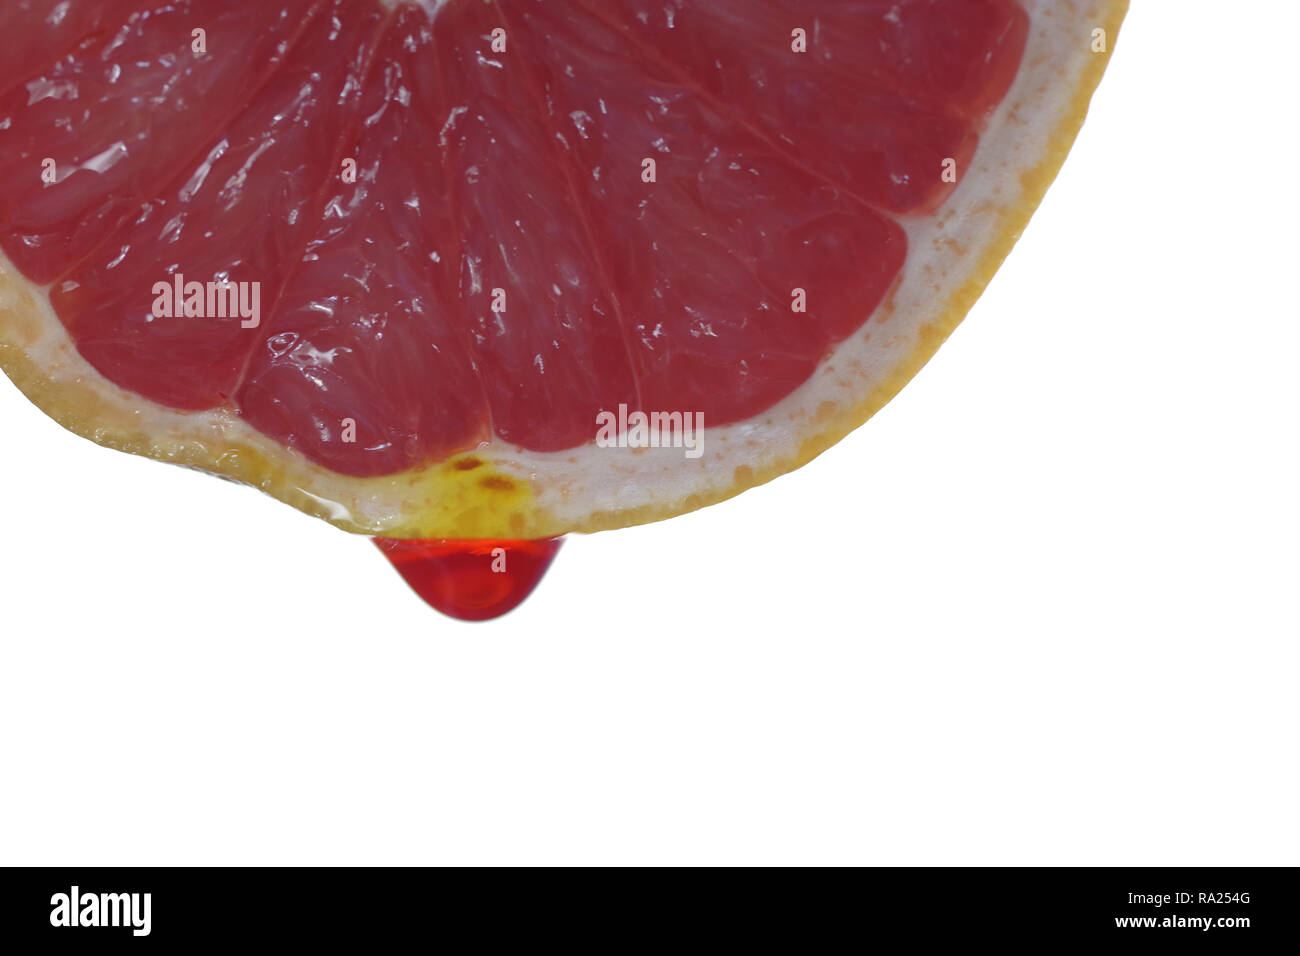 grapefruit with dripping clear juice on white background Stock Photo